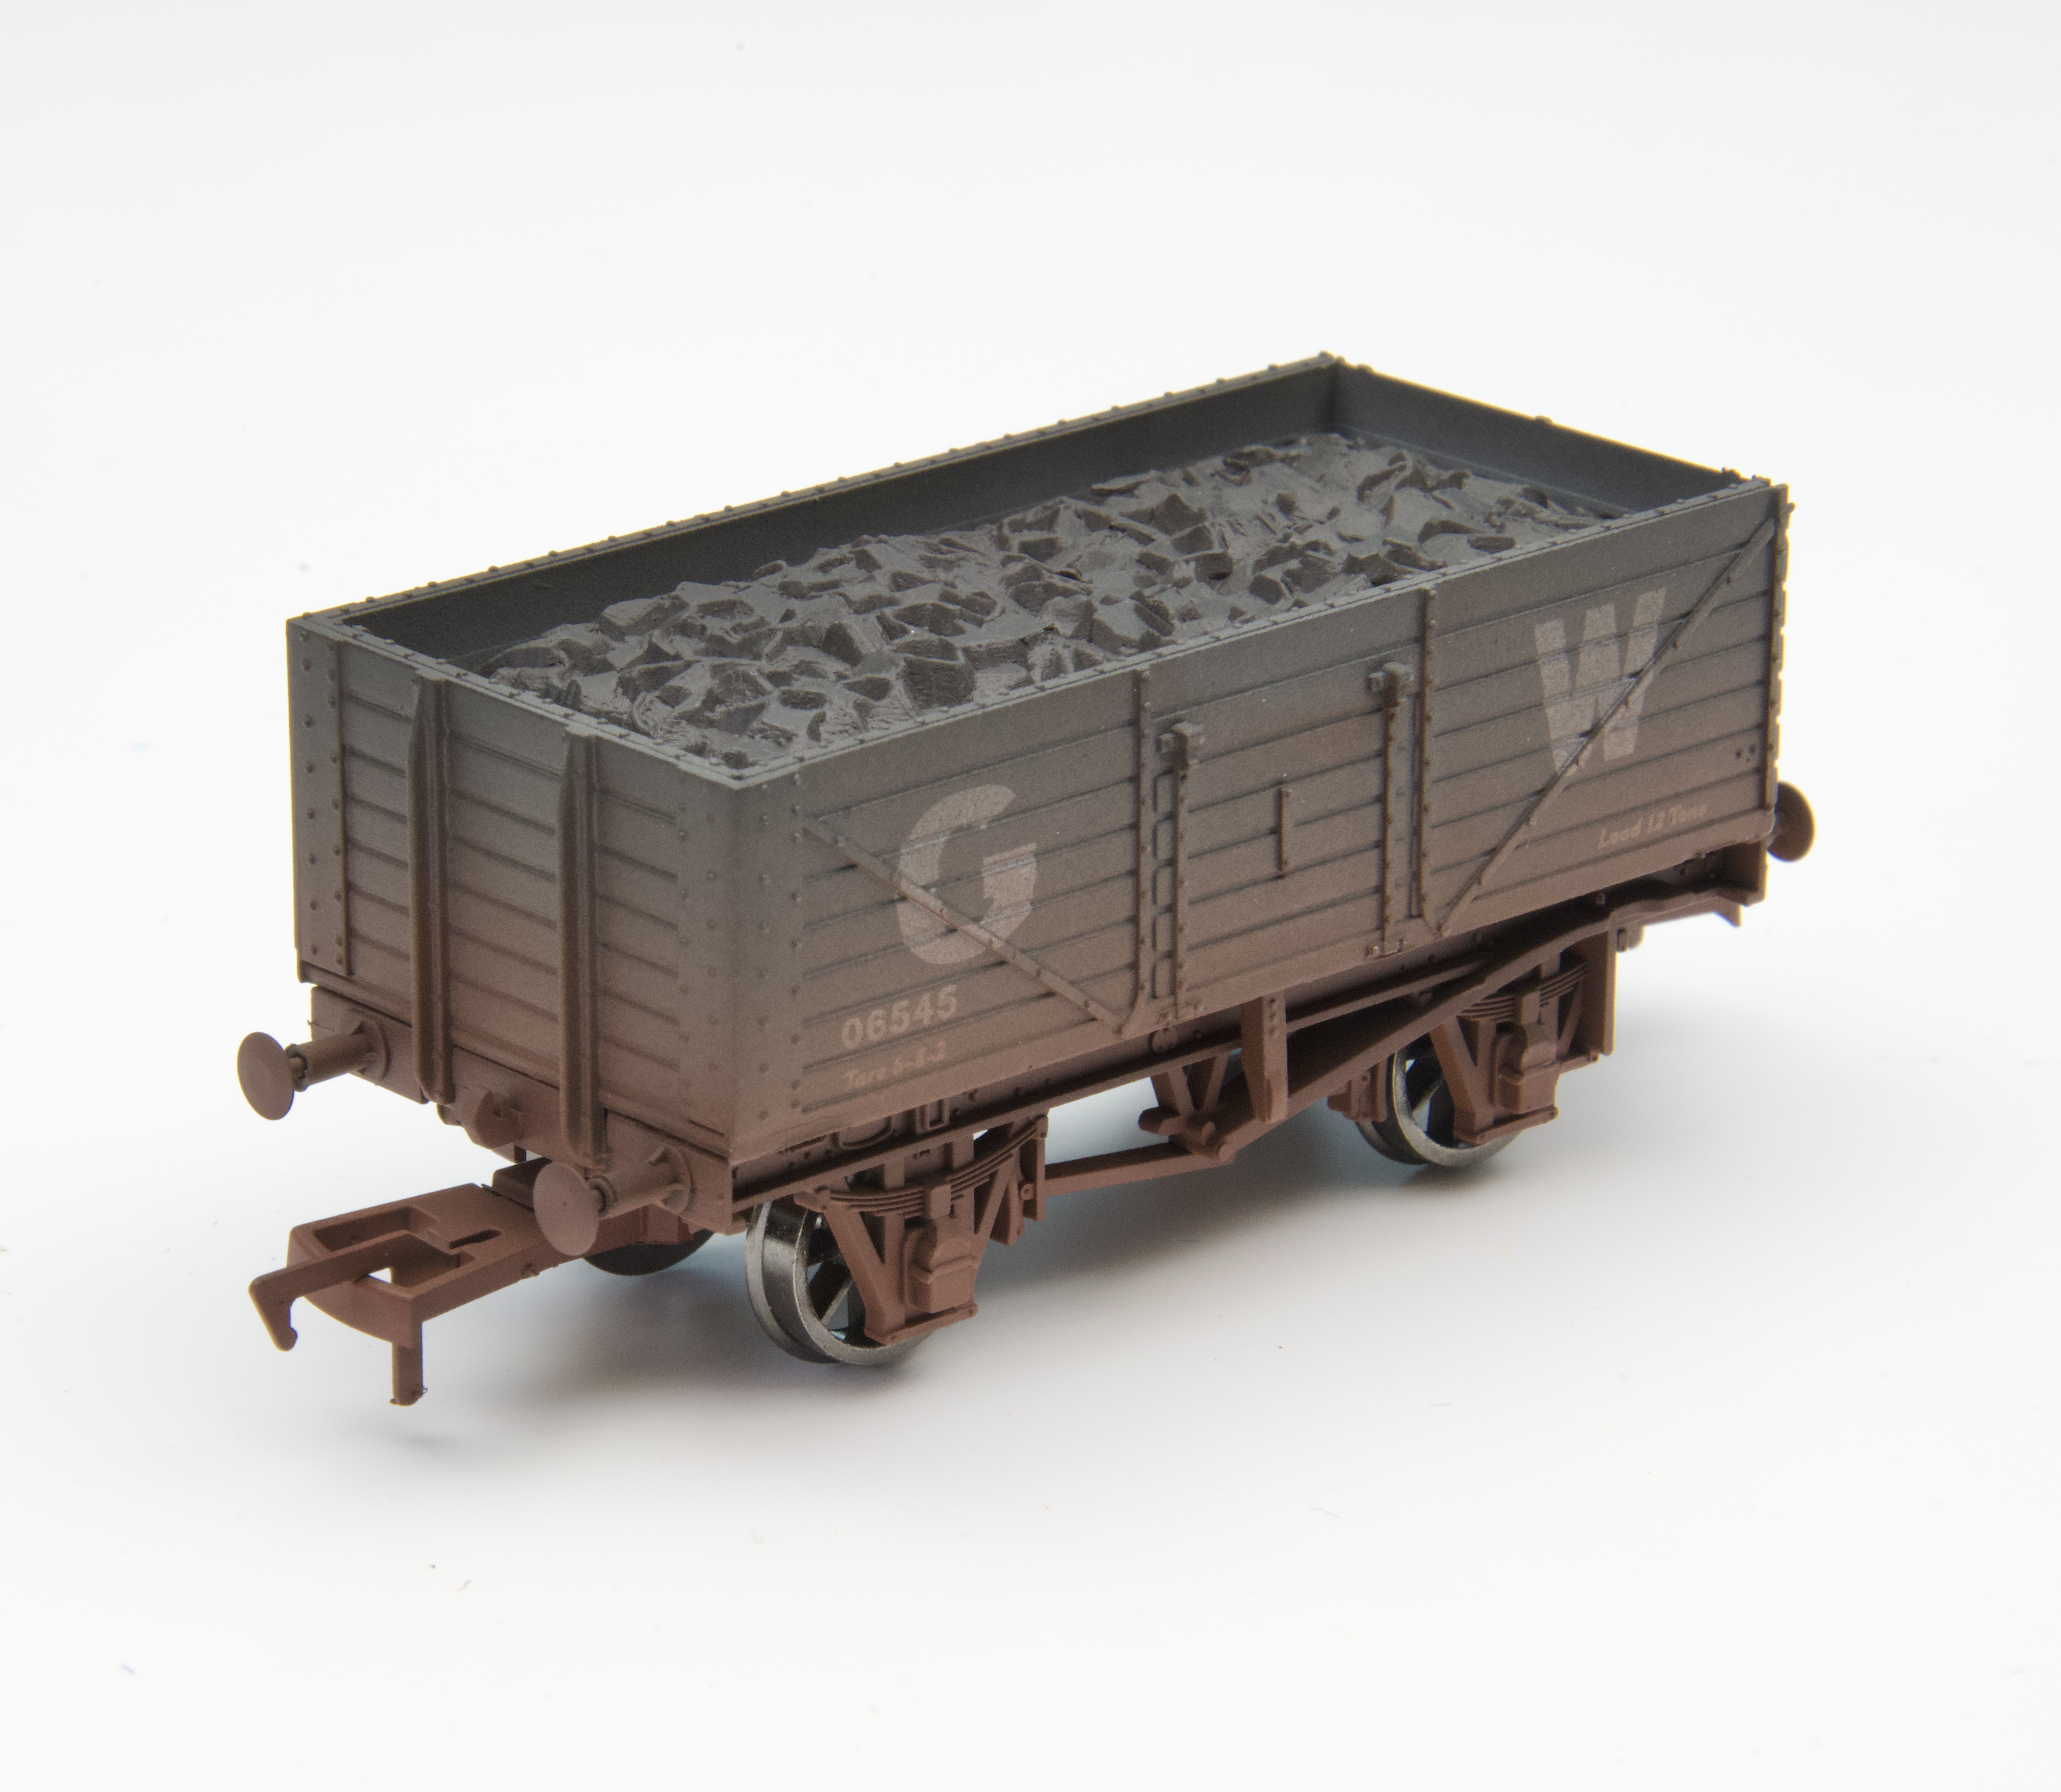 4F-071-179 7 Plank GWR 06545 Weathered